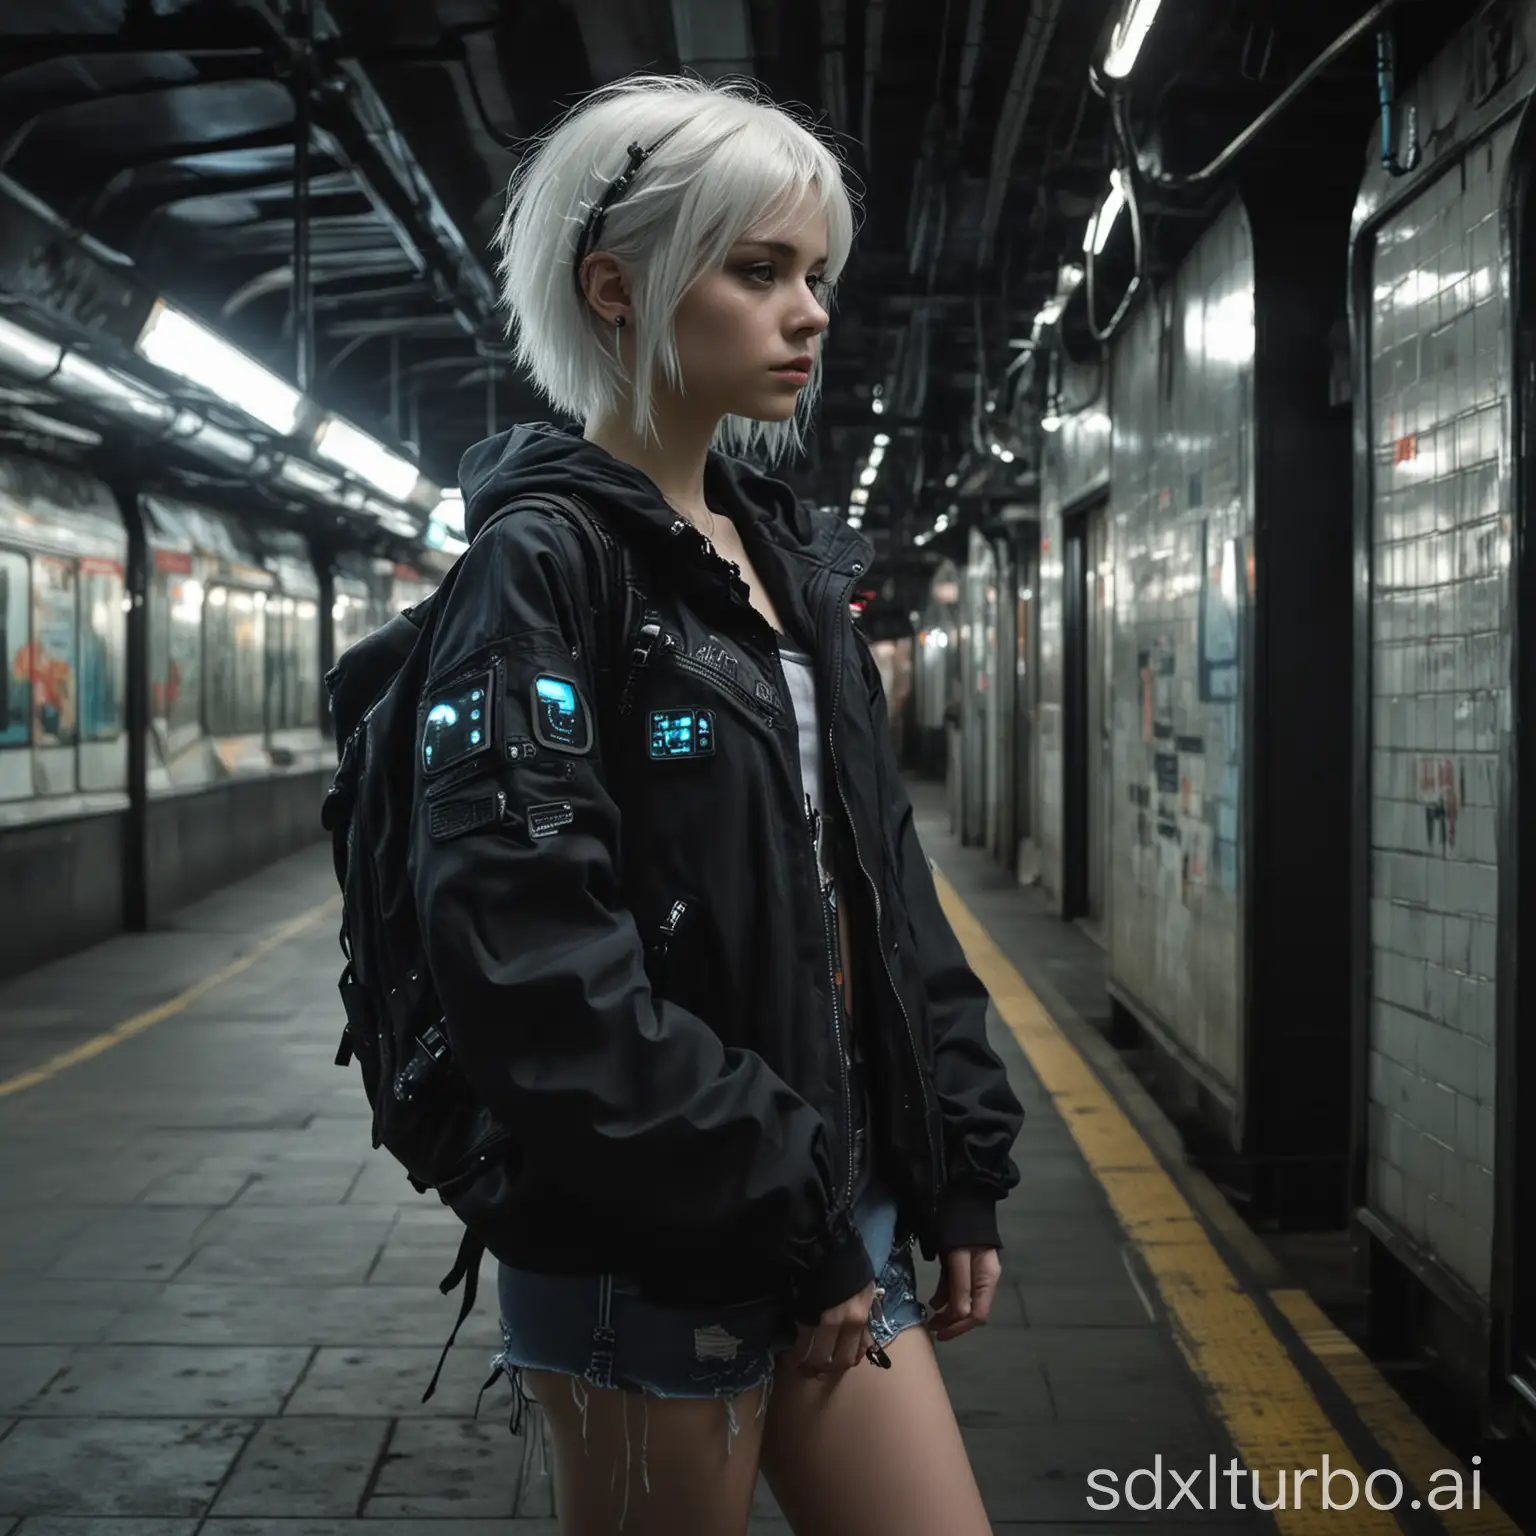 Futuristic-Femboy-Hacker-with-Bioluminescent-Outfit-in-Cyberpunk-Subway-Station